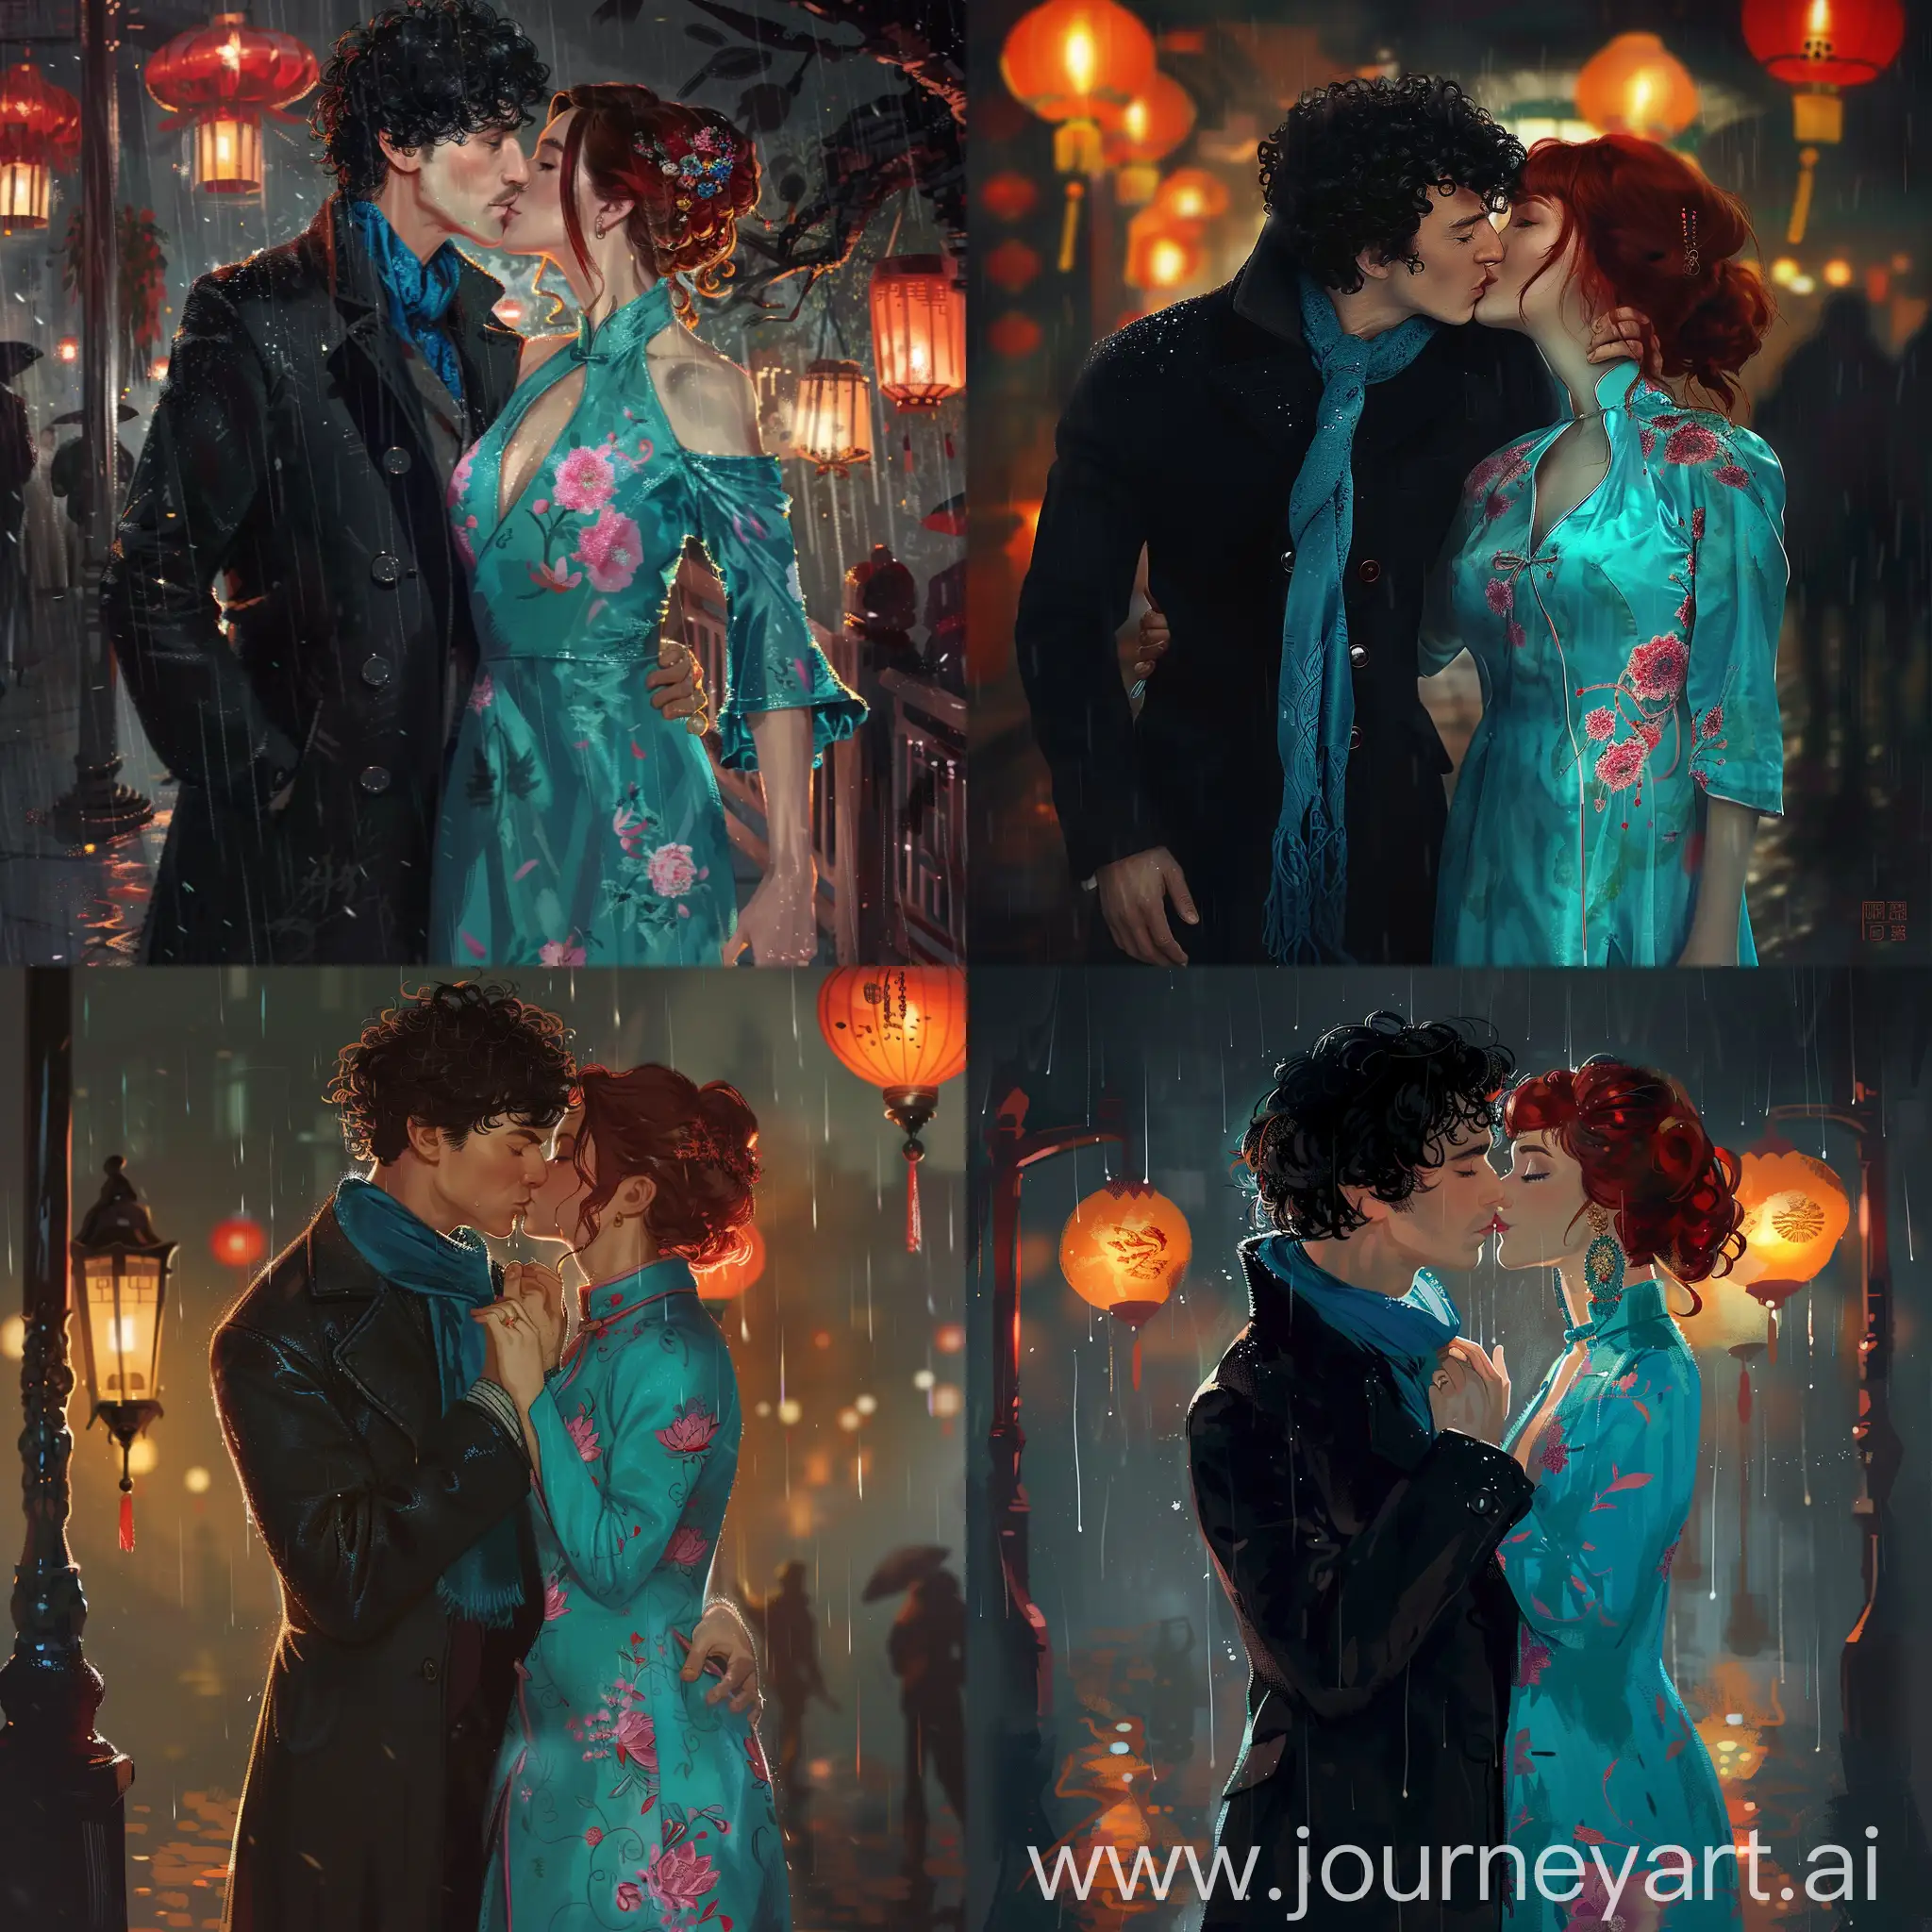 Romantic-Kiss-in-Rain-Sherlock-Holmes-and-Redhaired-Woman-Embrace-Under-Lantern-Light